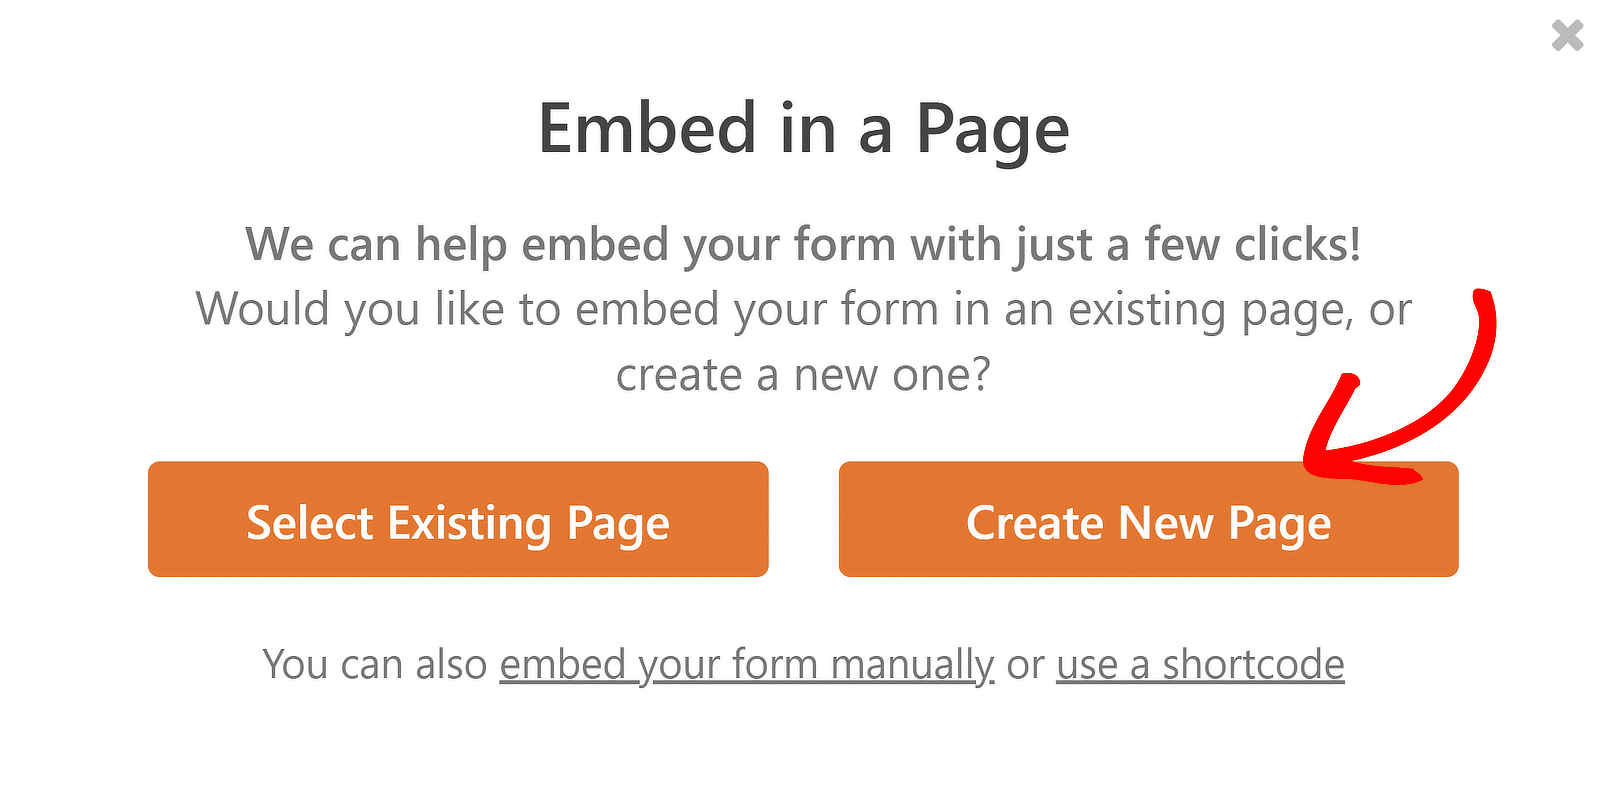 Create new page